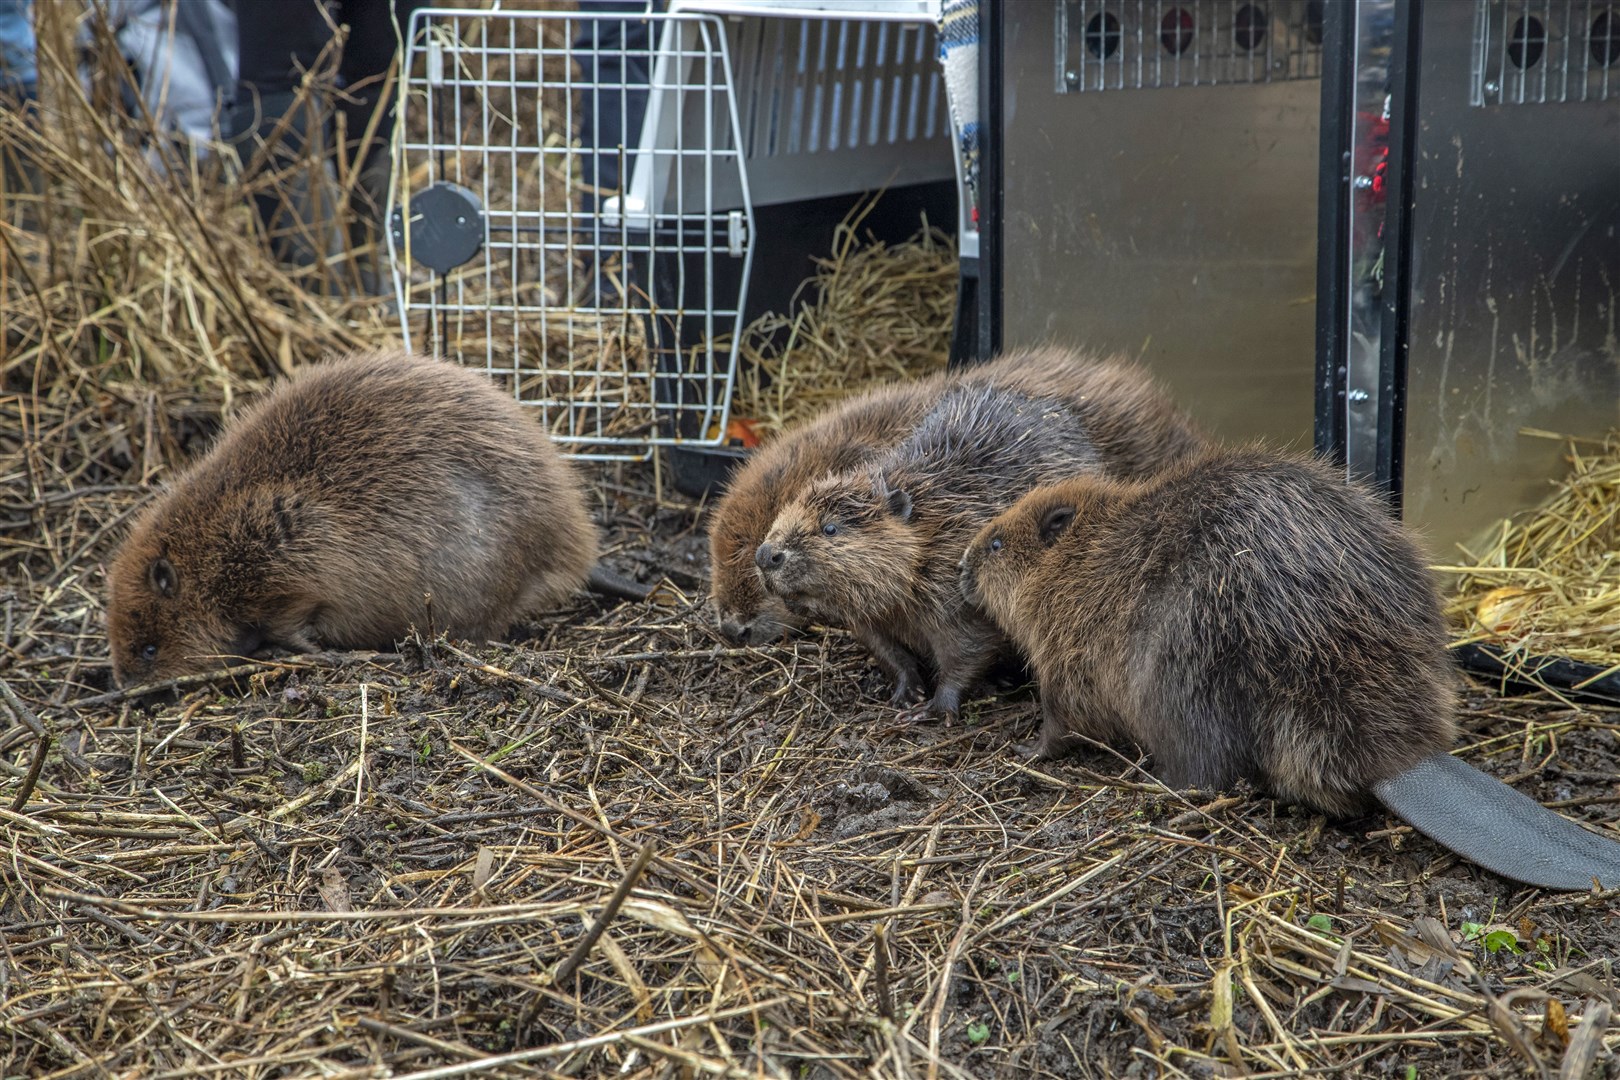 The beaver kits were released after their journey last month (Joshua Glavin/The Beaver Trust/PA)